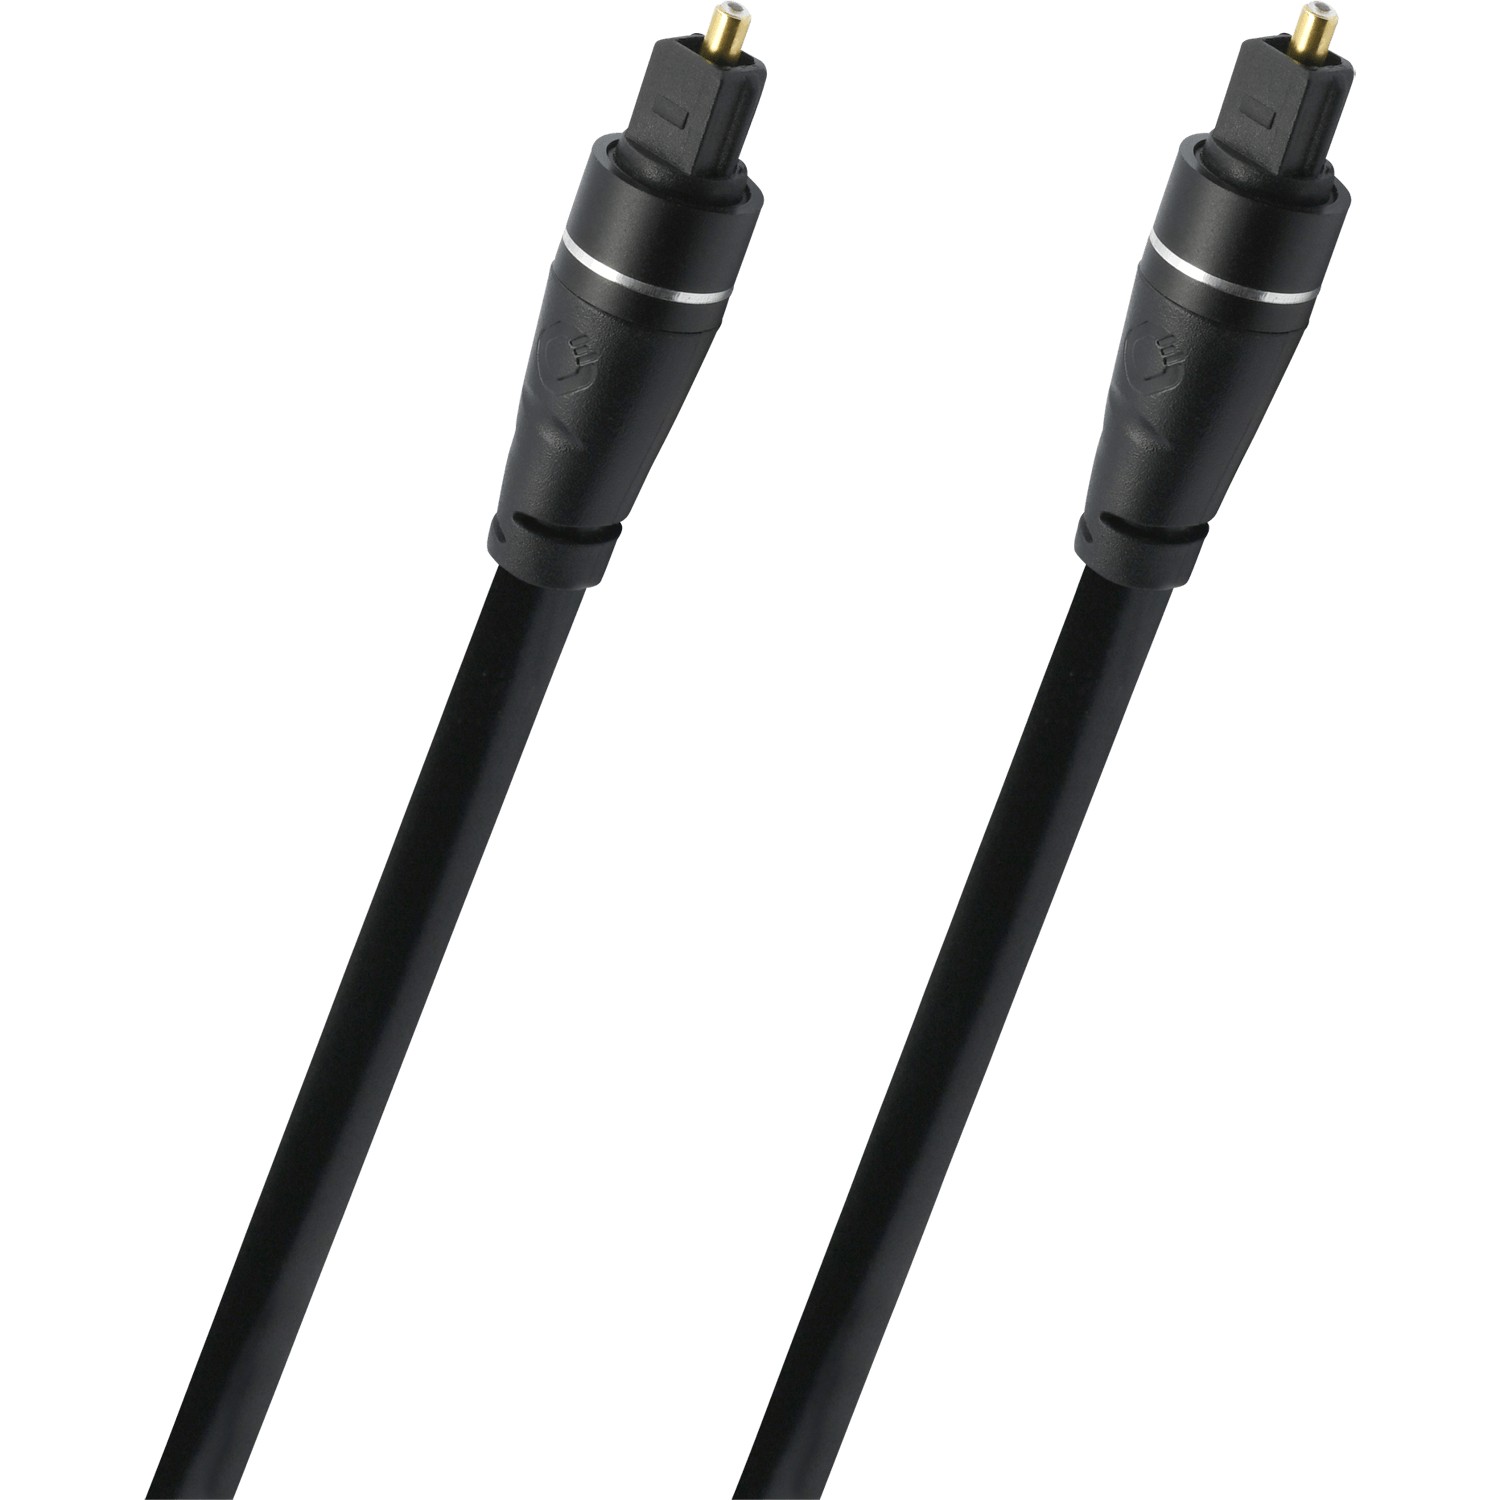 Кабели межблочные аудио Oehlbach EXCELLENCE Select Opto Link, Toslink cable 3,0m sw, D1C33134 кабели межблочные аудио oehlbach select audio link cable 3 0m d1c33145